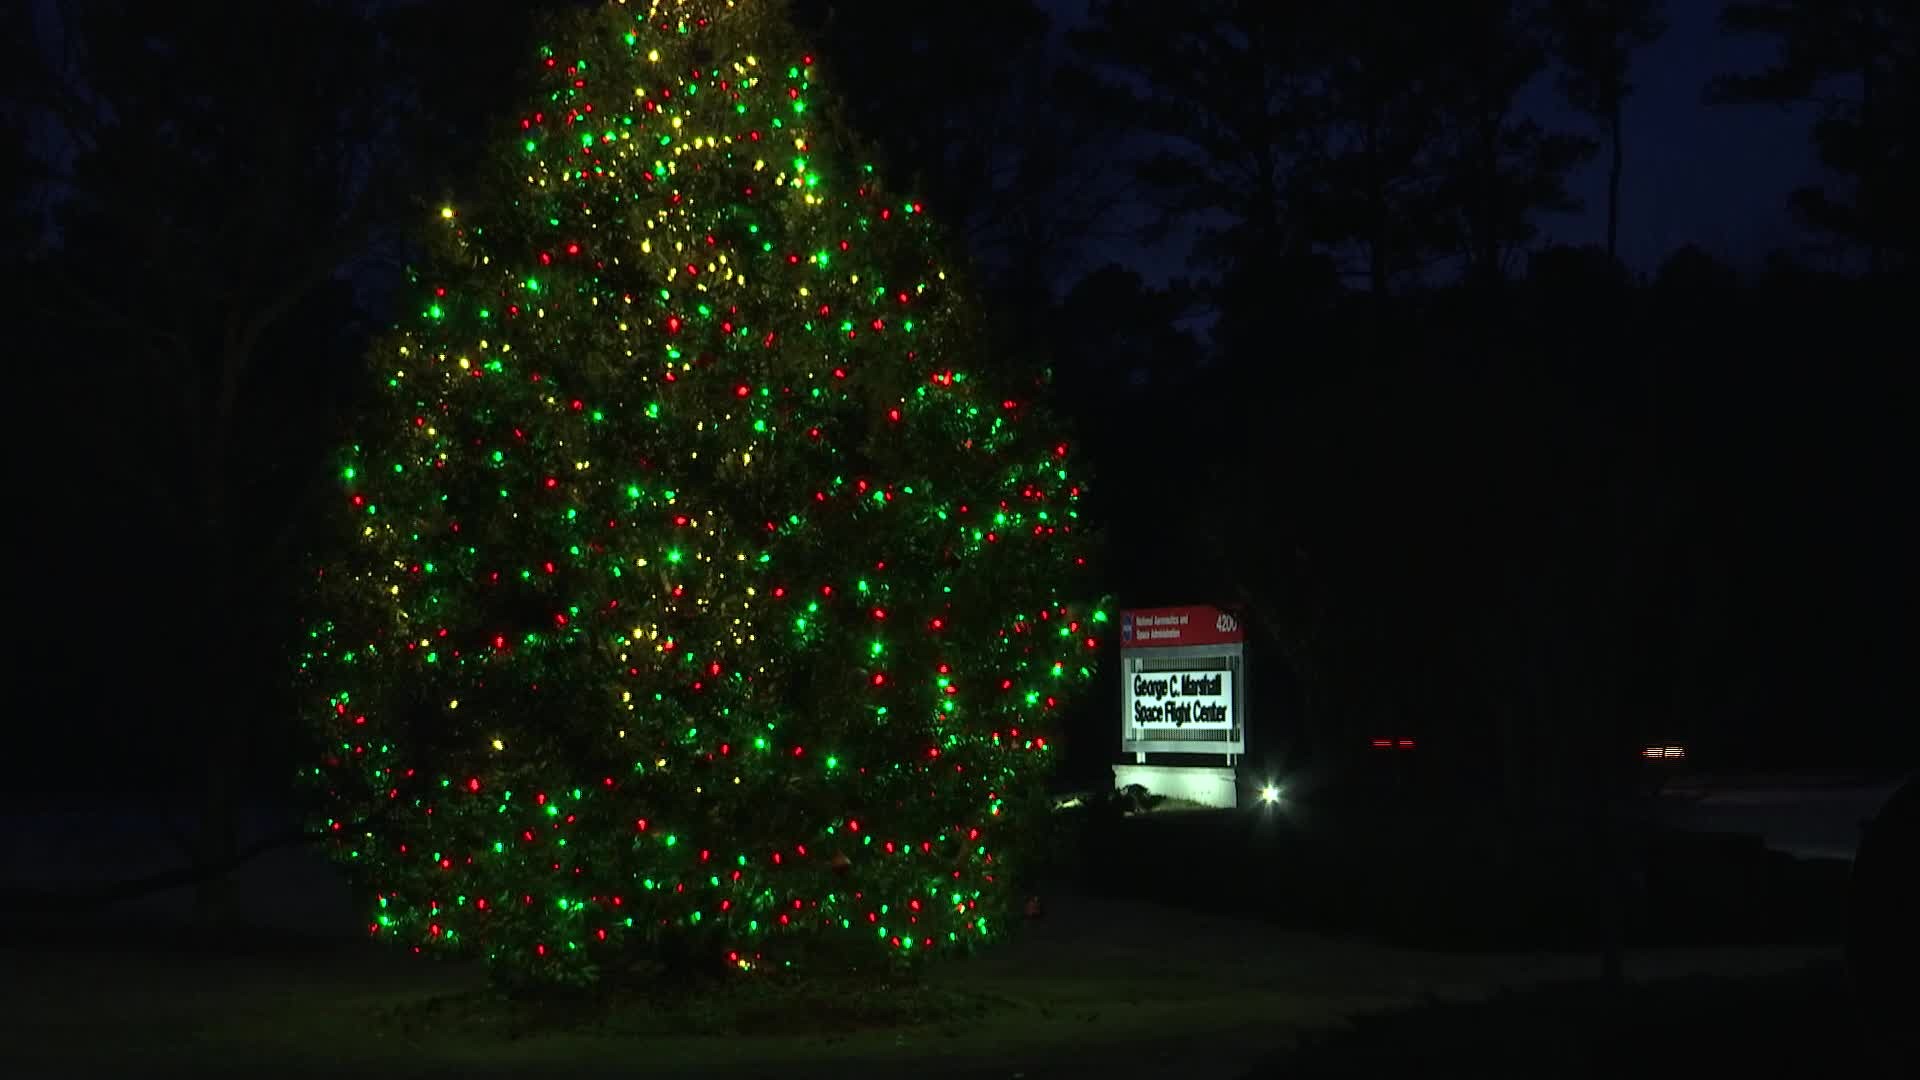 NASA's Marshall Space Flight Center hosted their annual tree lighting ceremony Monday evening.